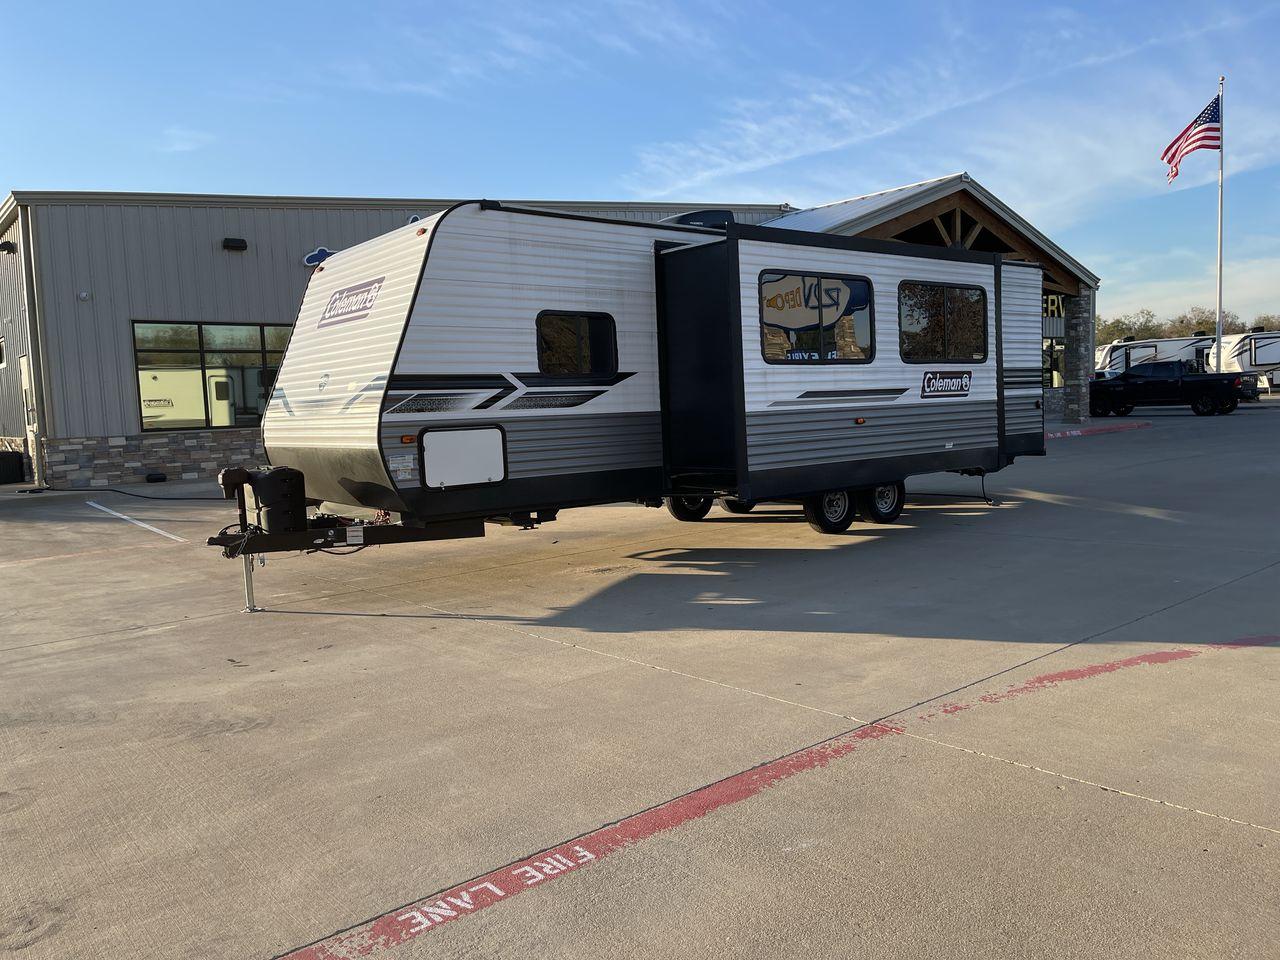 2022 KEYSTONE COLEMAN 285BH (4YDTCMN28NH) , Length: 32.75 ft | Dry Weight: 6,611 lbs. | Slides: 1 transmission, located at 4319 N Main St, Cleburne, TX, 76033, (817) 678-5133, 32.385960, -97.391212 - Experience the ultimate blend of comfort and adventure with the 2022 Keystone Coleman 285BH. This meticulously designed travel trailer is perfect for enhancing your camping experience. Adjusting the specifications, this model extends to a generous 32.75 feet with a dry weight of 6,611 lbs, providing - Photo #25